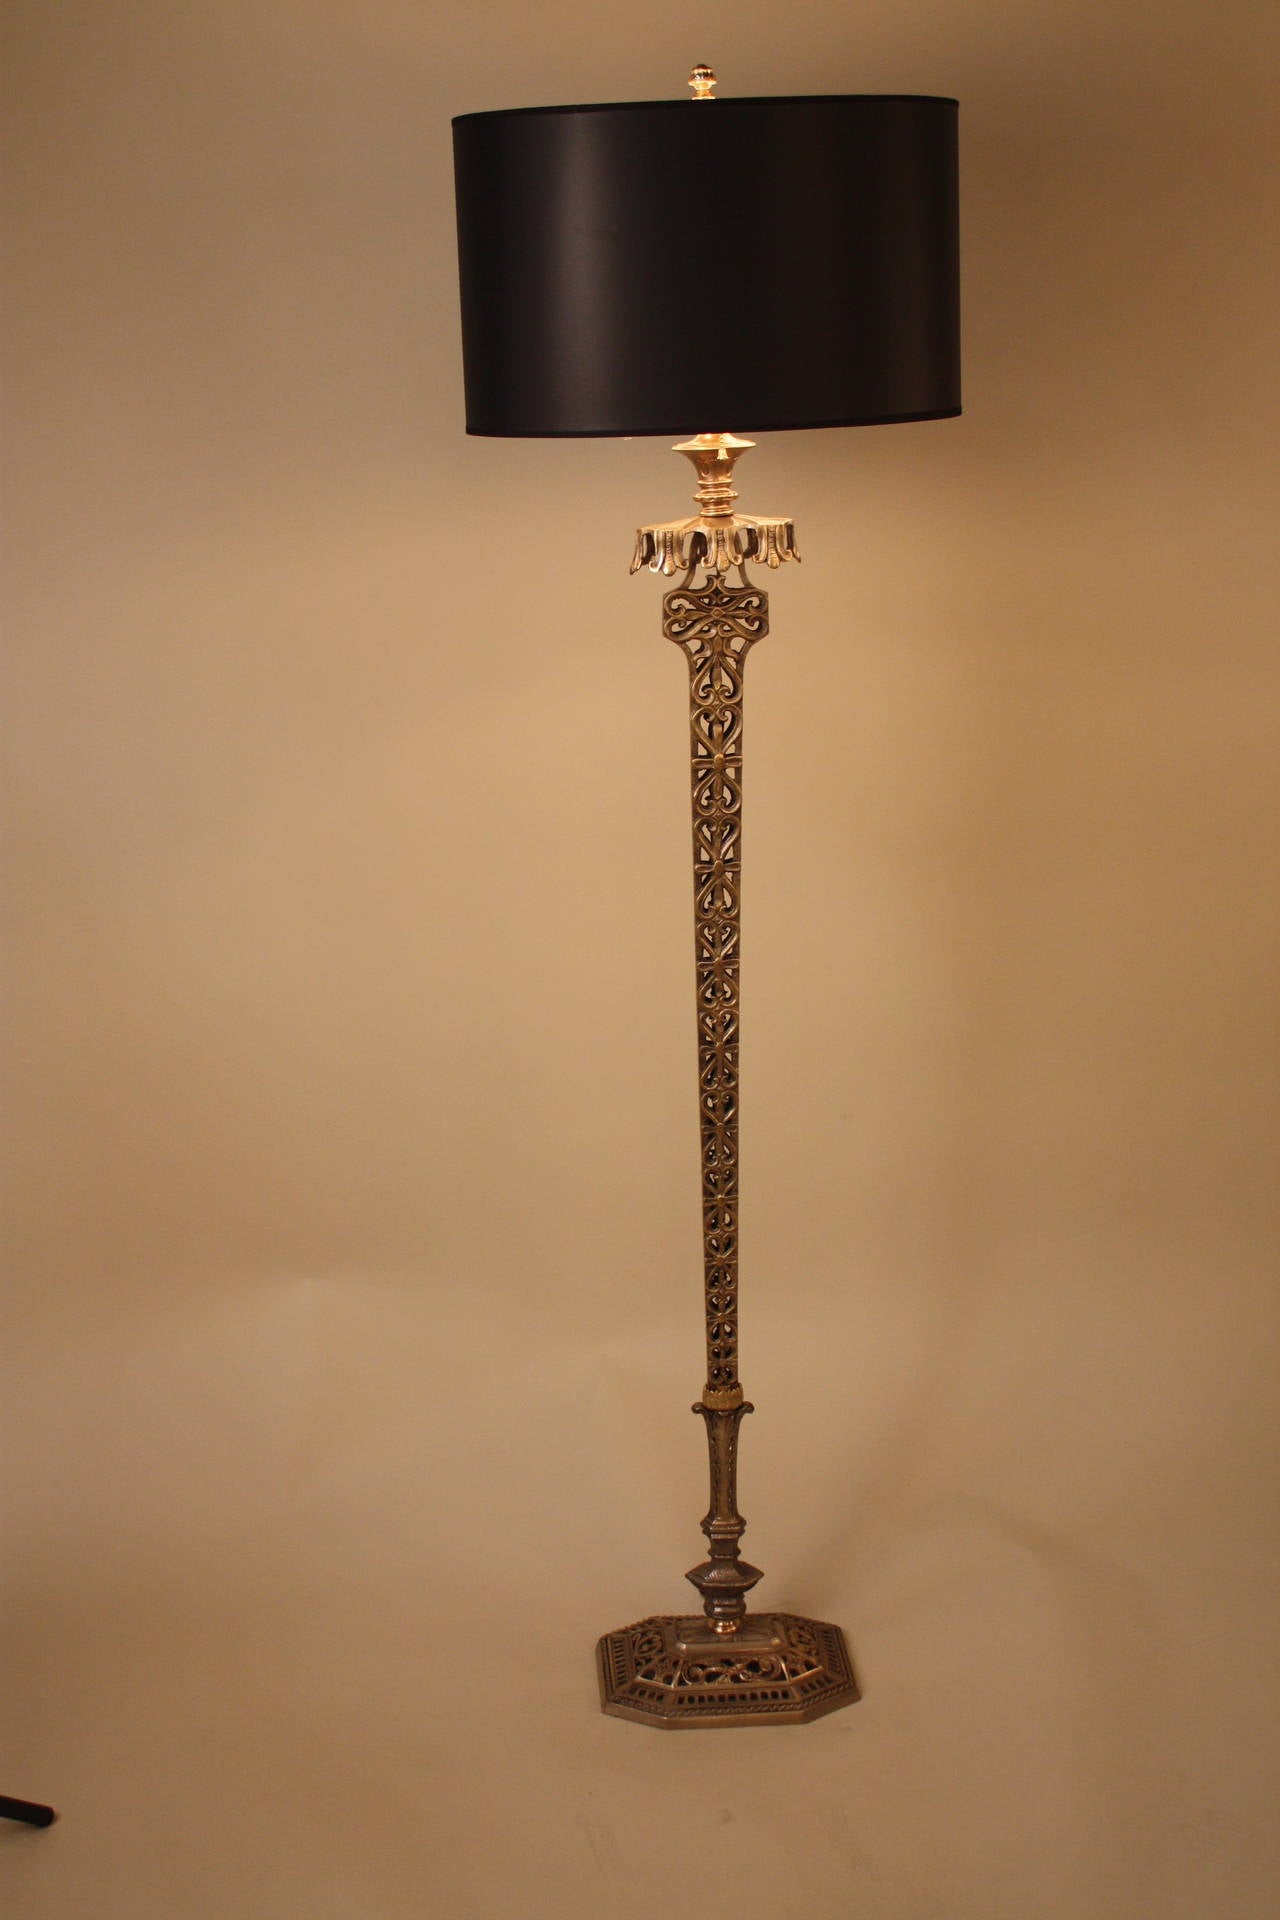 An unusually designed American floor lamp with oblong column that is wide at top and gets narrow at the base. The column is a two tone colored oxidized nickel with highlights of soft brushed shinny brass. This lamp is fitted with a silver-lined oval